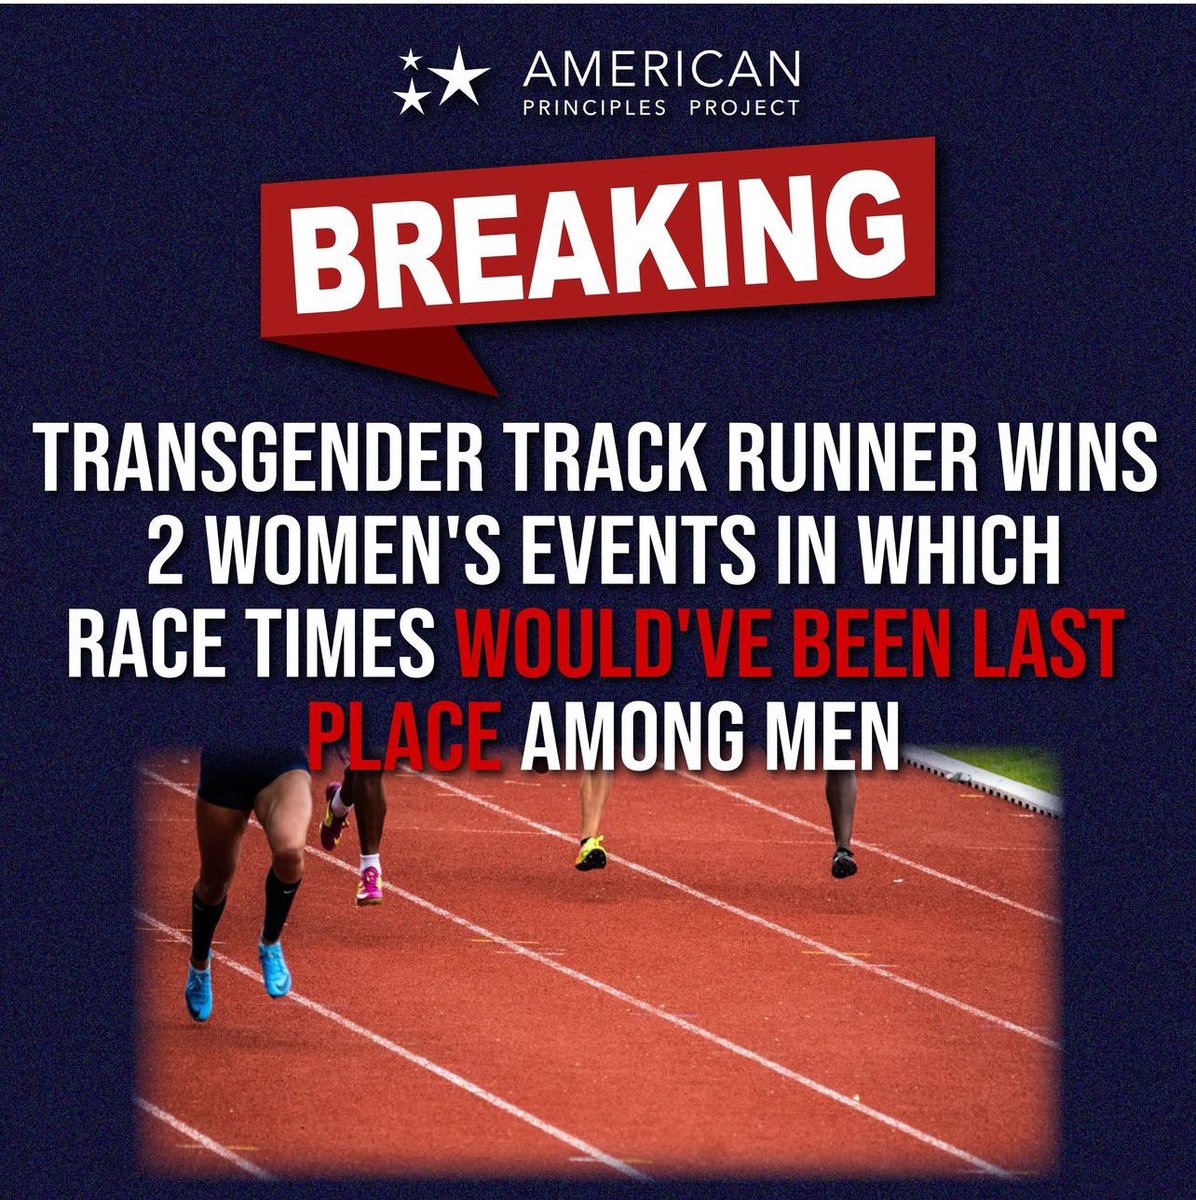 Men and women aren't biologically the same.
No Trans 'Women' In Female Sports.
#SaveWomensSports